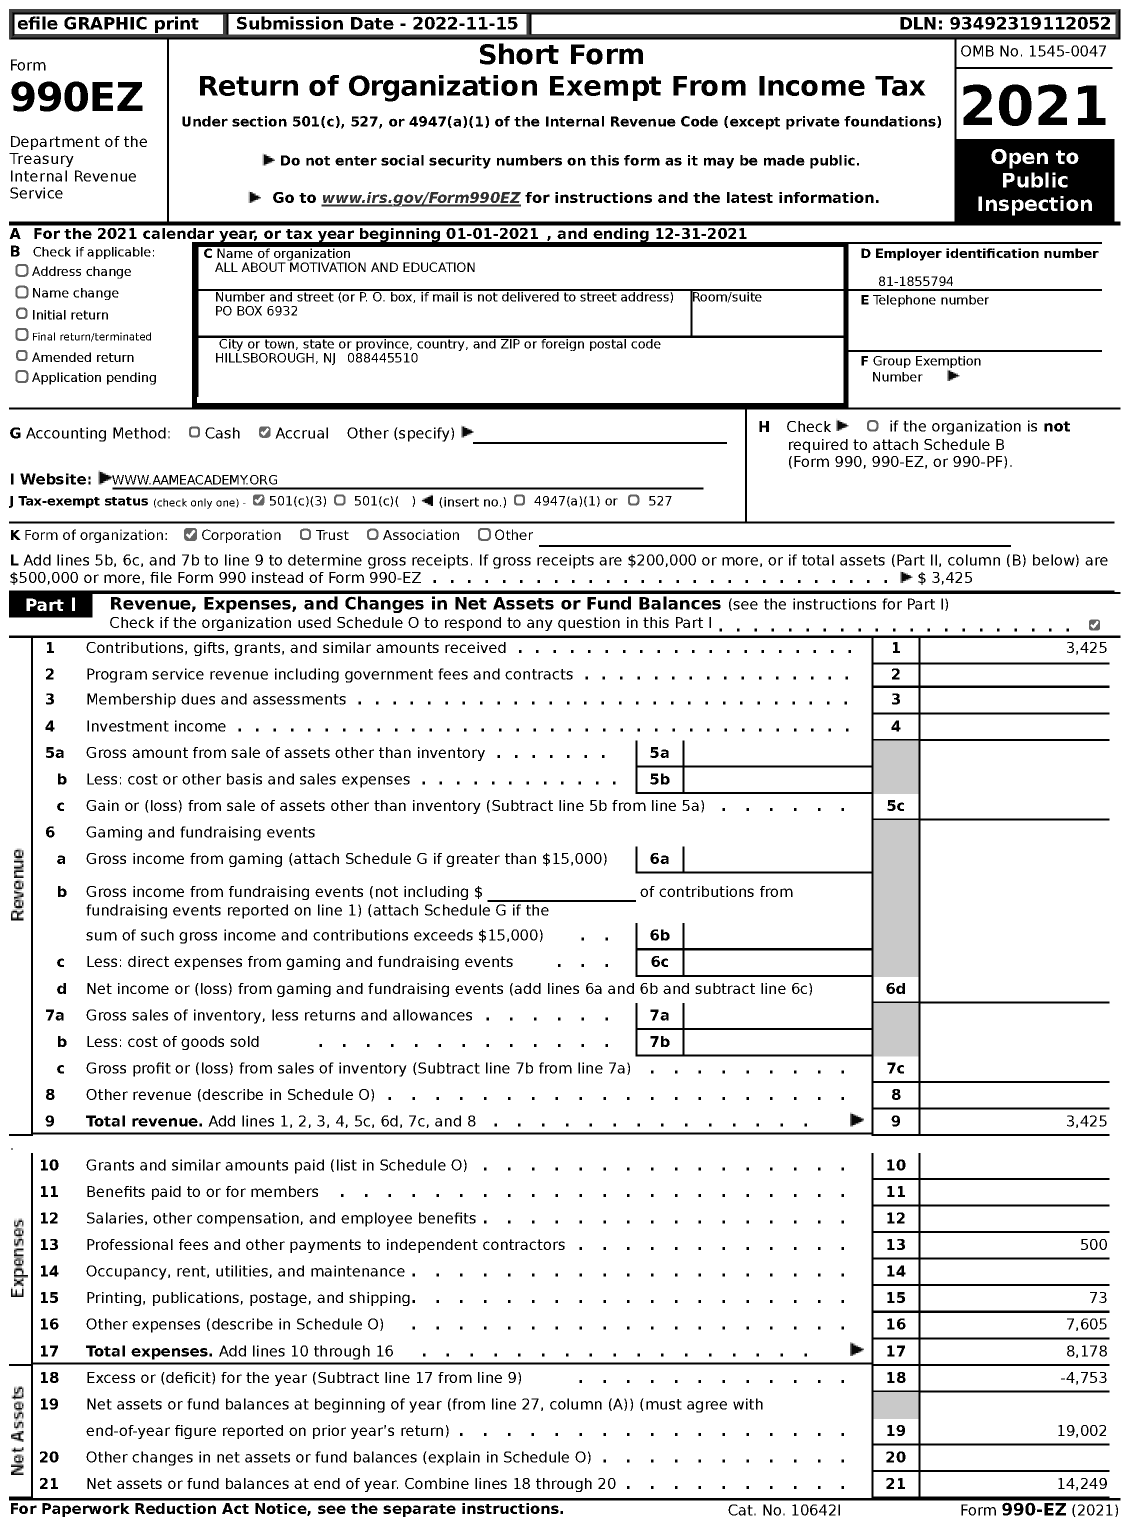 Image of first page of 2021 Form 990EZ for All About Motivation and Education